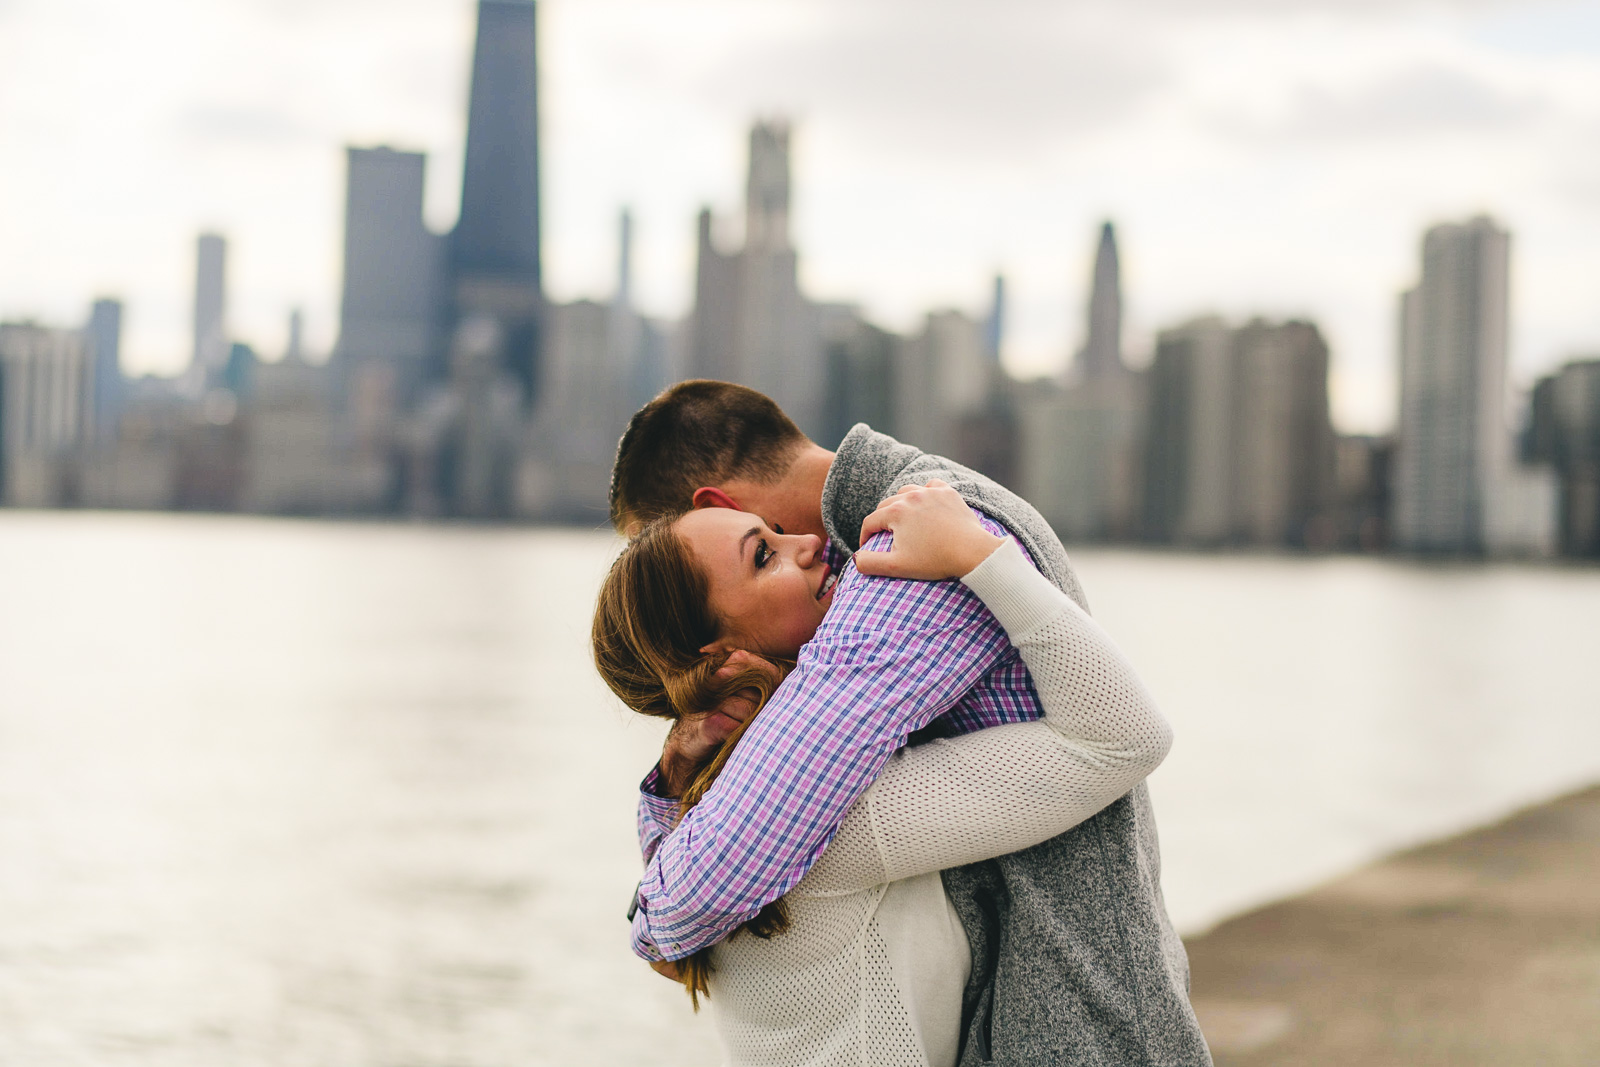 10 peter gubernat is the best proposal photographer - Chicago Marriage Proposal // Mark + Jacklyn